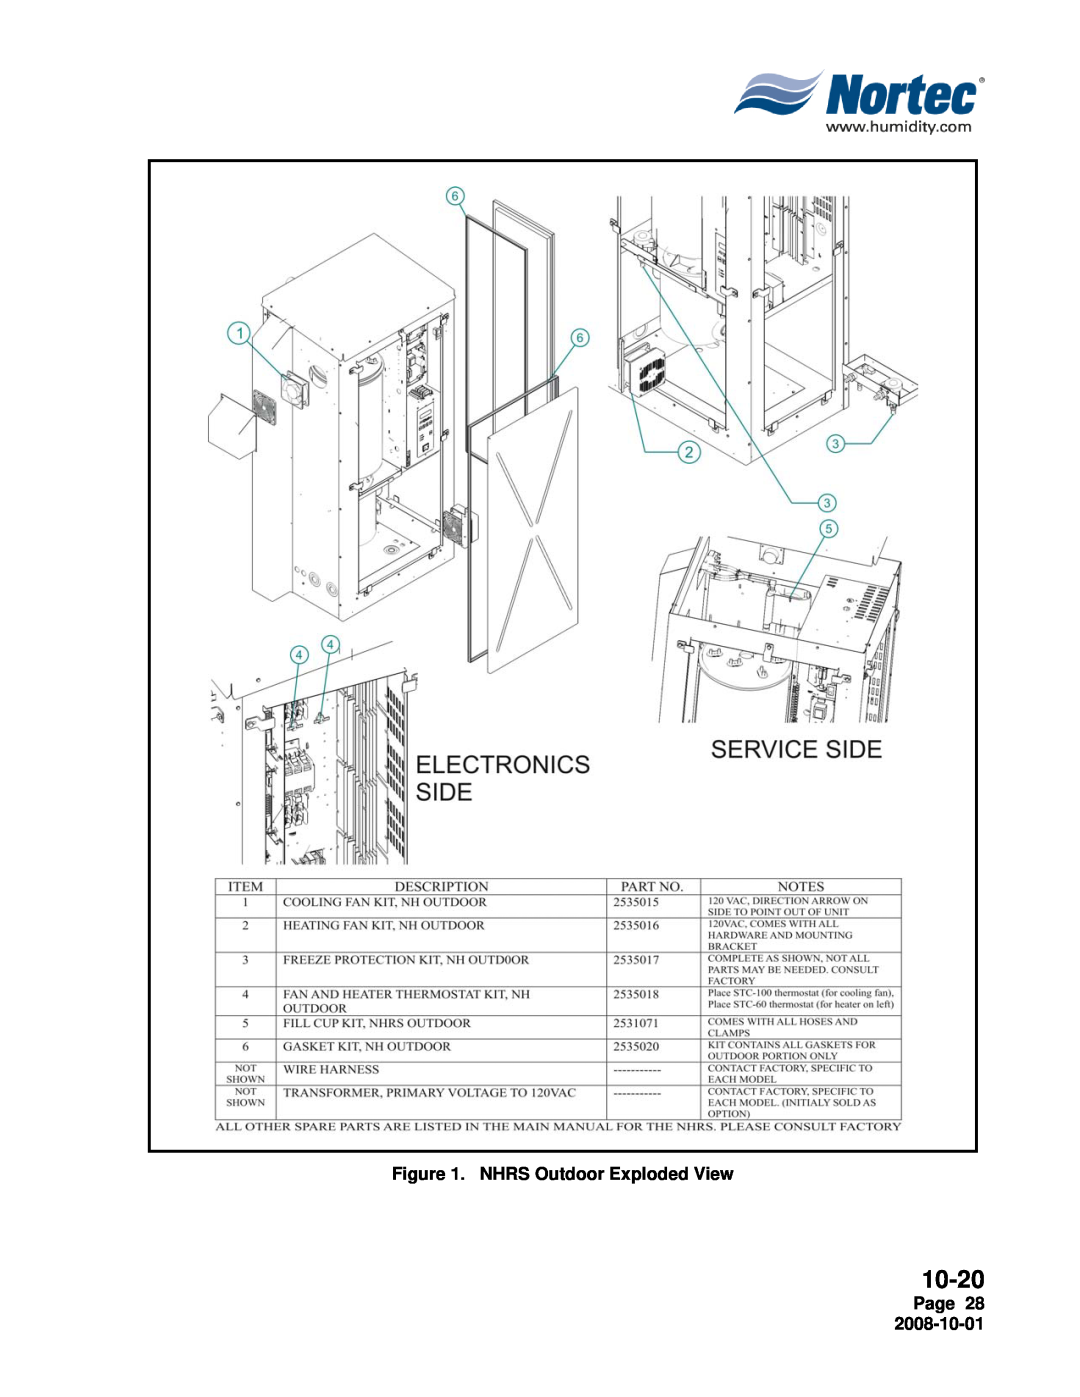 Nortec Industries NH Series installation manual 10-20, NHRS Outdoor Exploded View, Page 